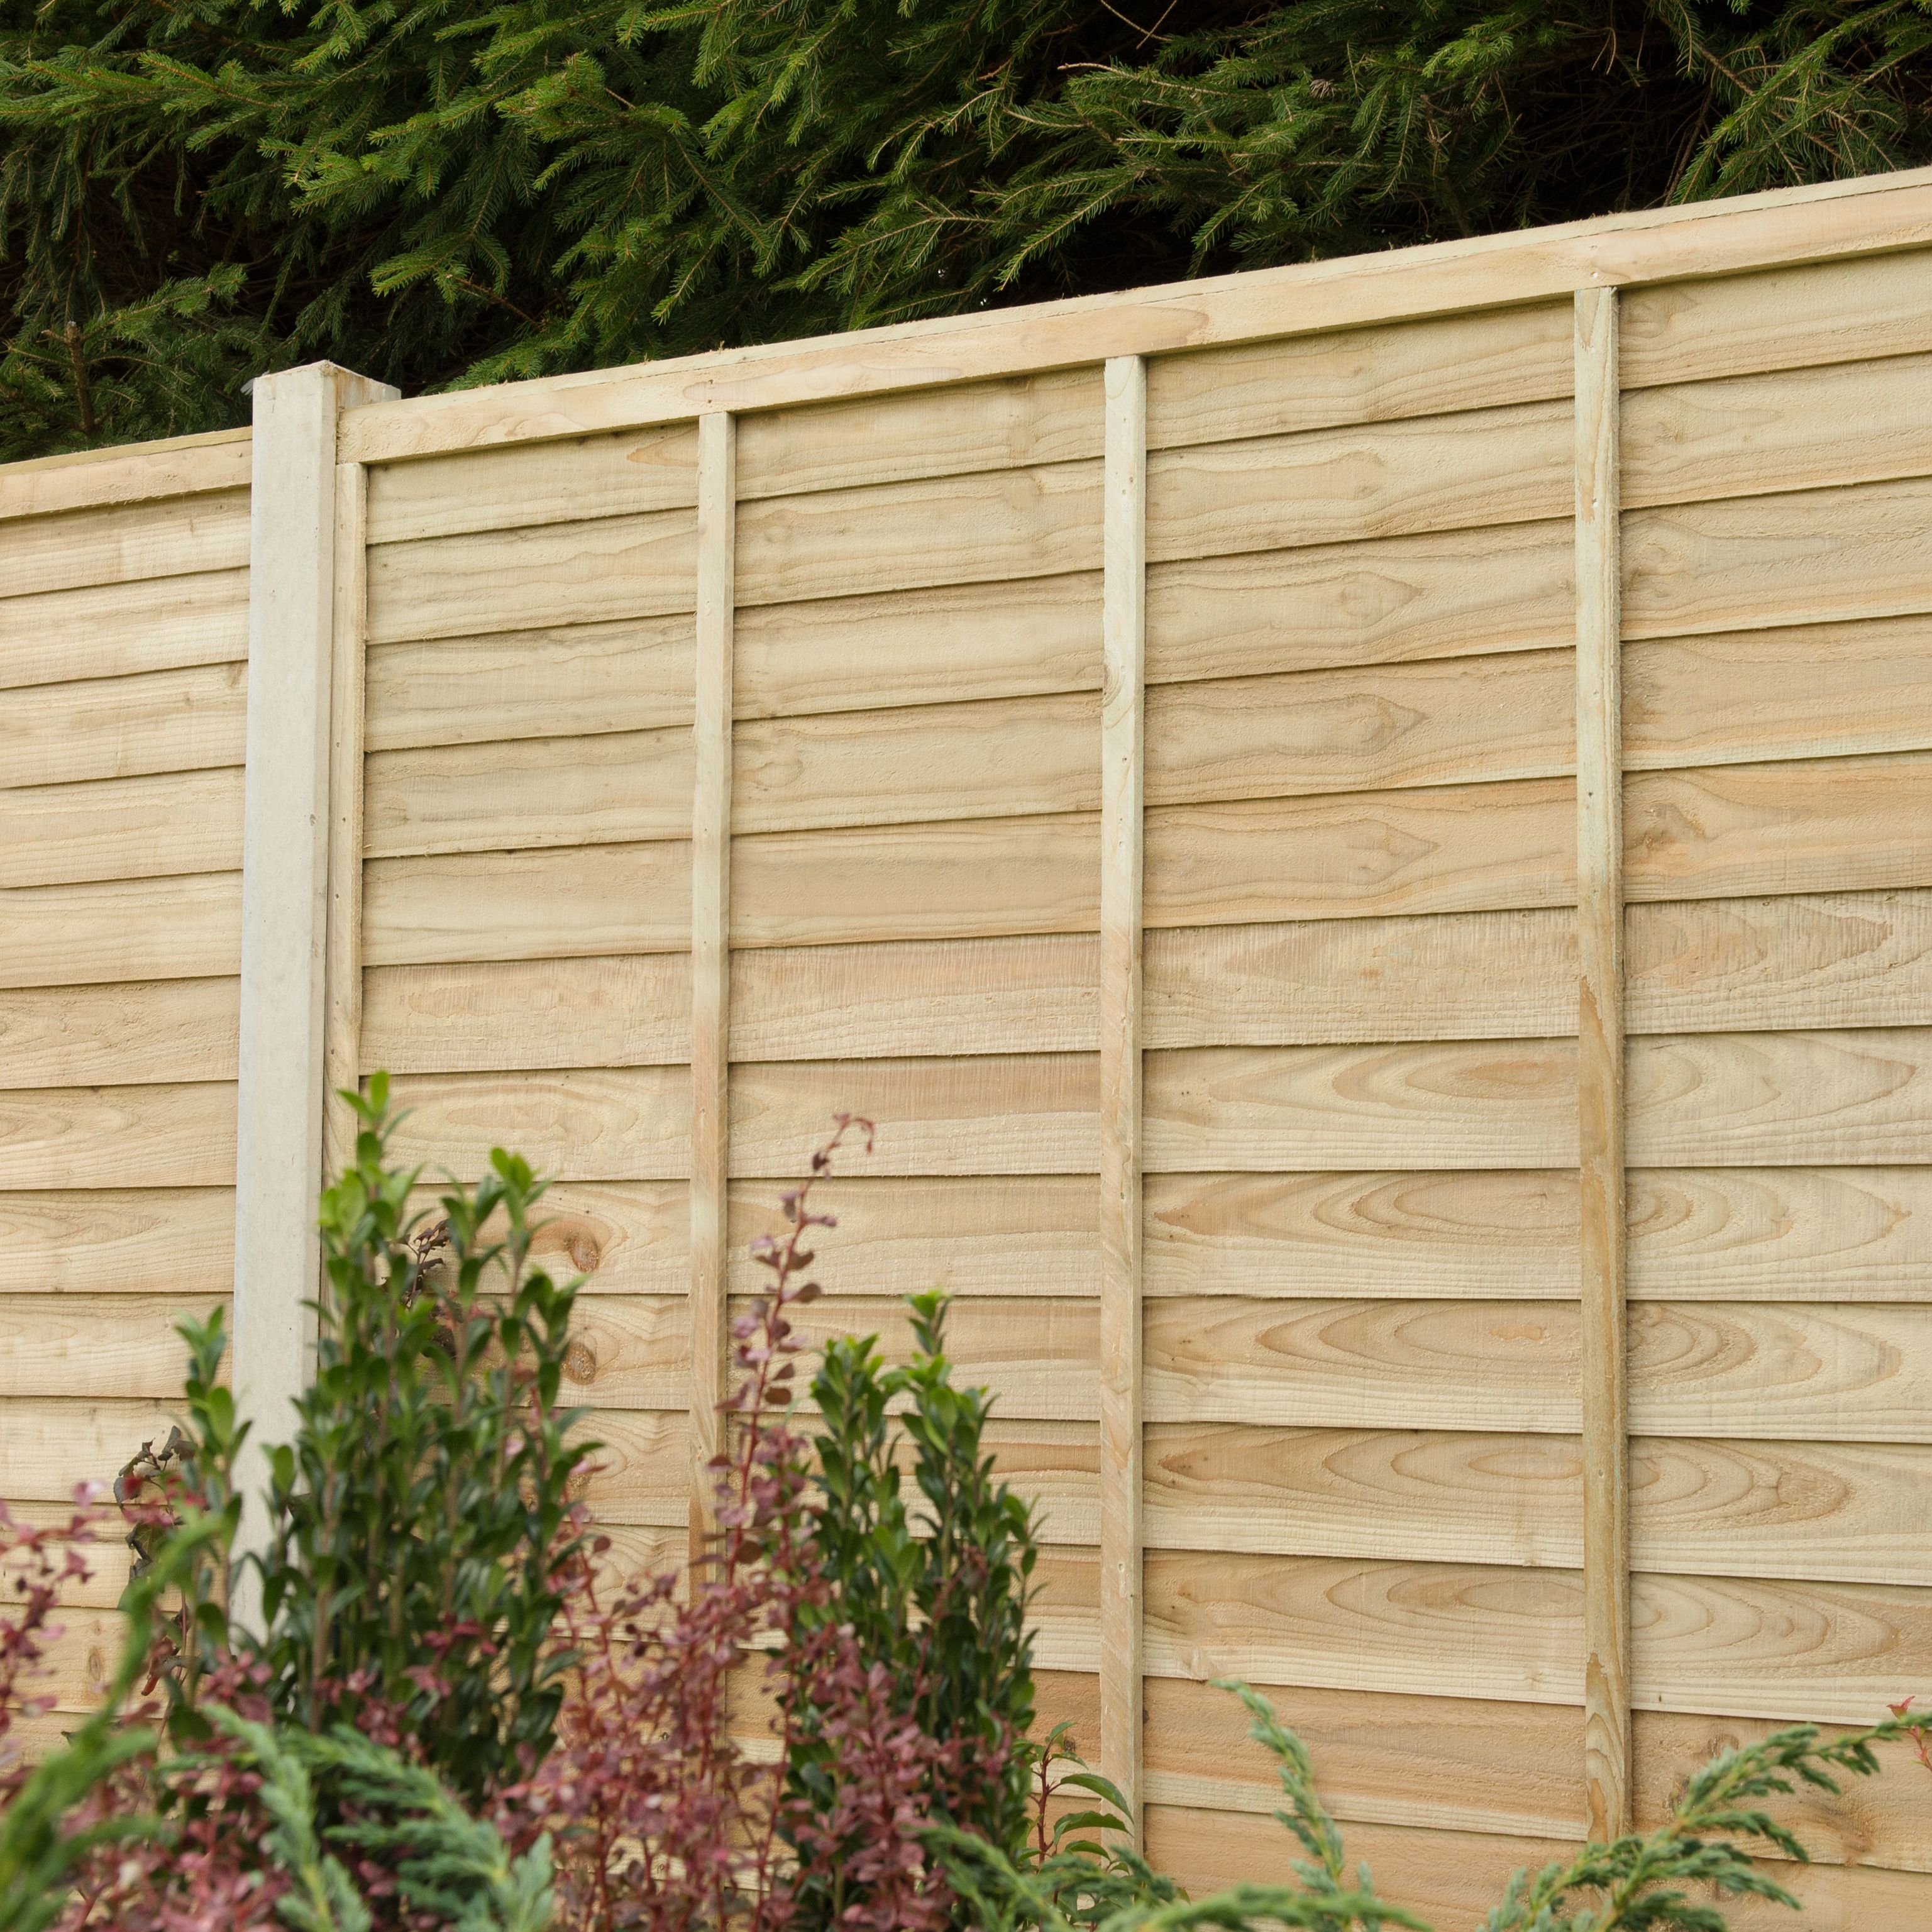 Premier Overlap Lap Pressure treated 6ft Wooden Fence panel (W)1.83m (H)1.83m, Pack of 4